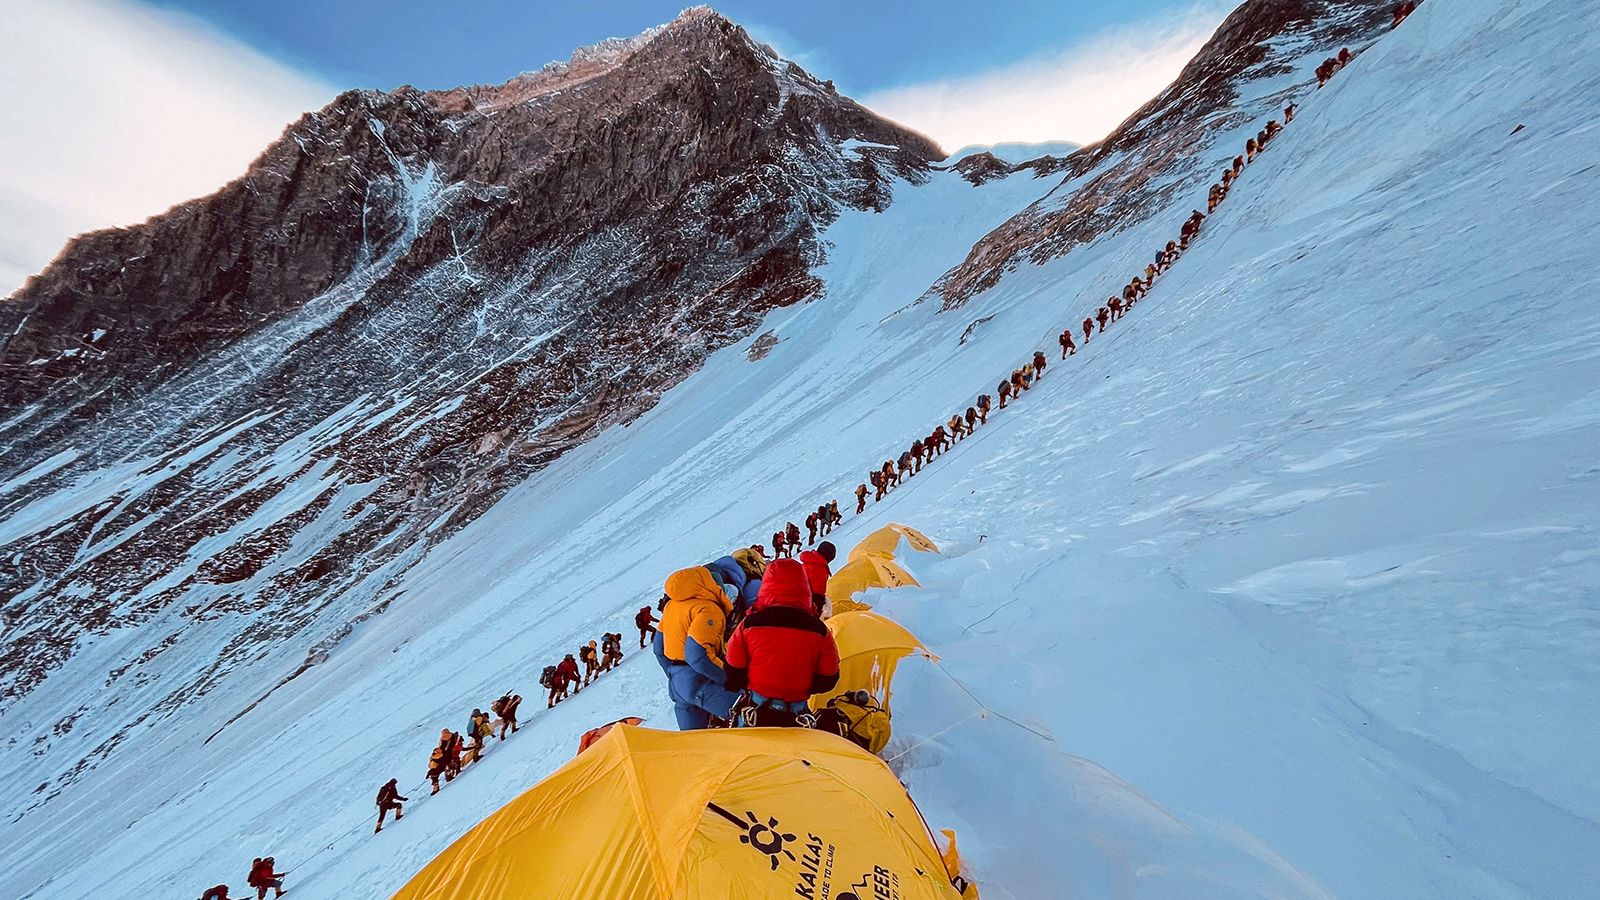 Mount Everest Expedition - Aviation in Nepal (Getty Images)